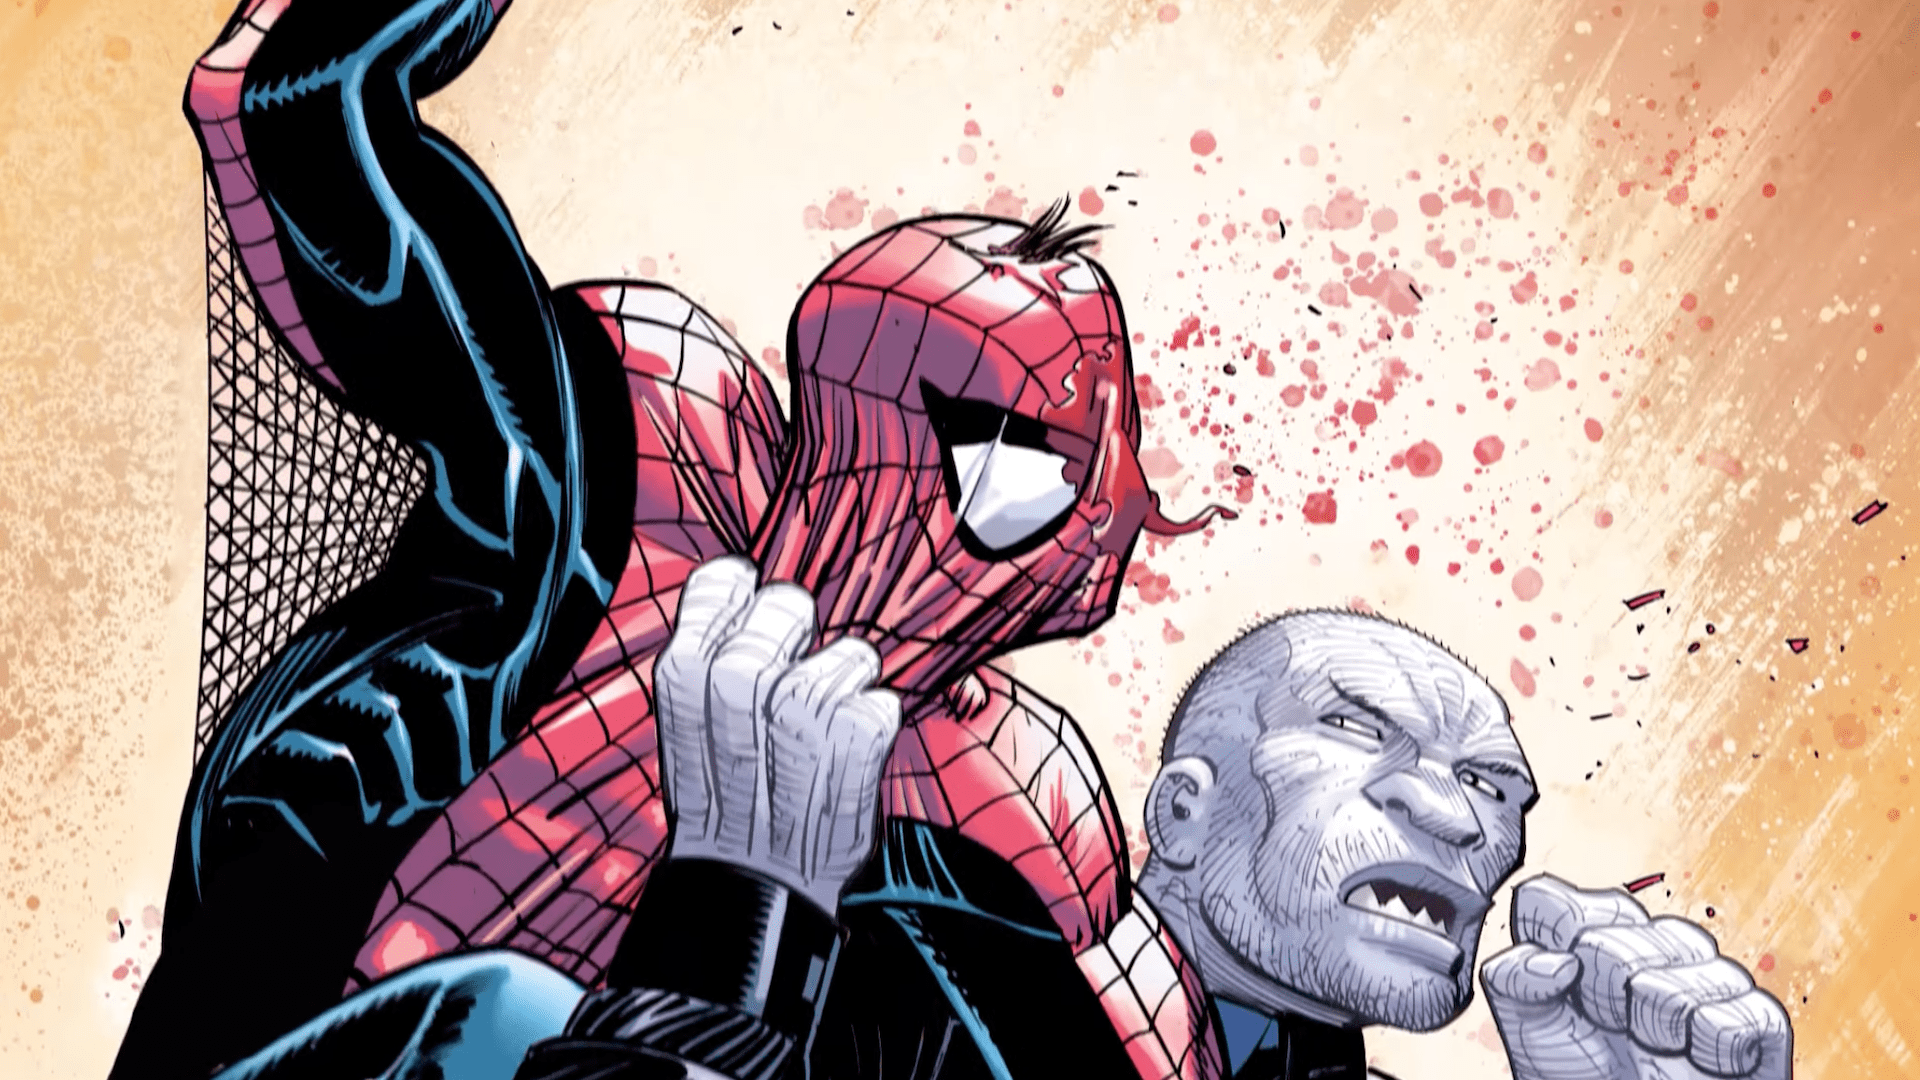 Marvel launches 'Amazing Spider-Man' #1 trailer ahead of April release